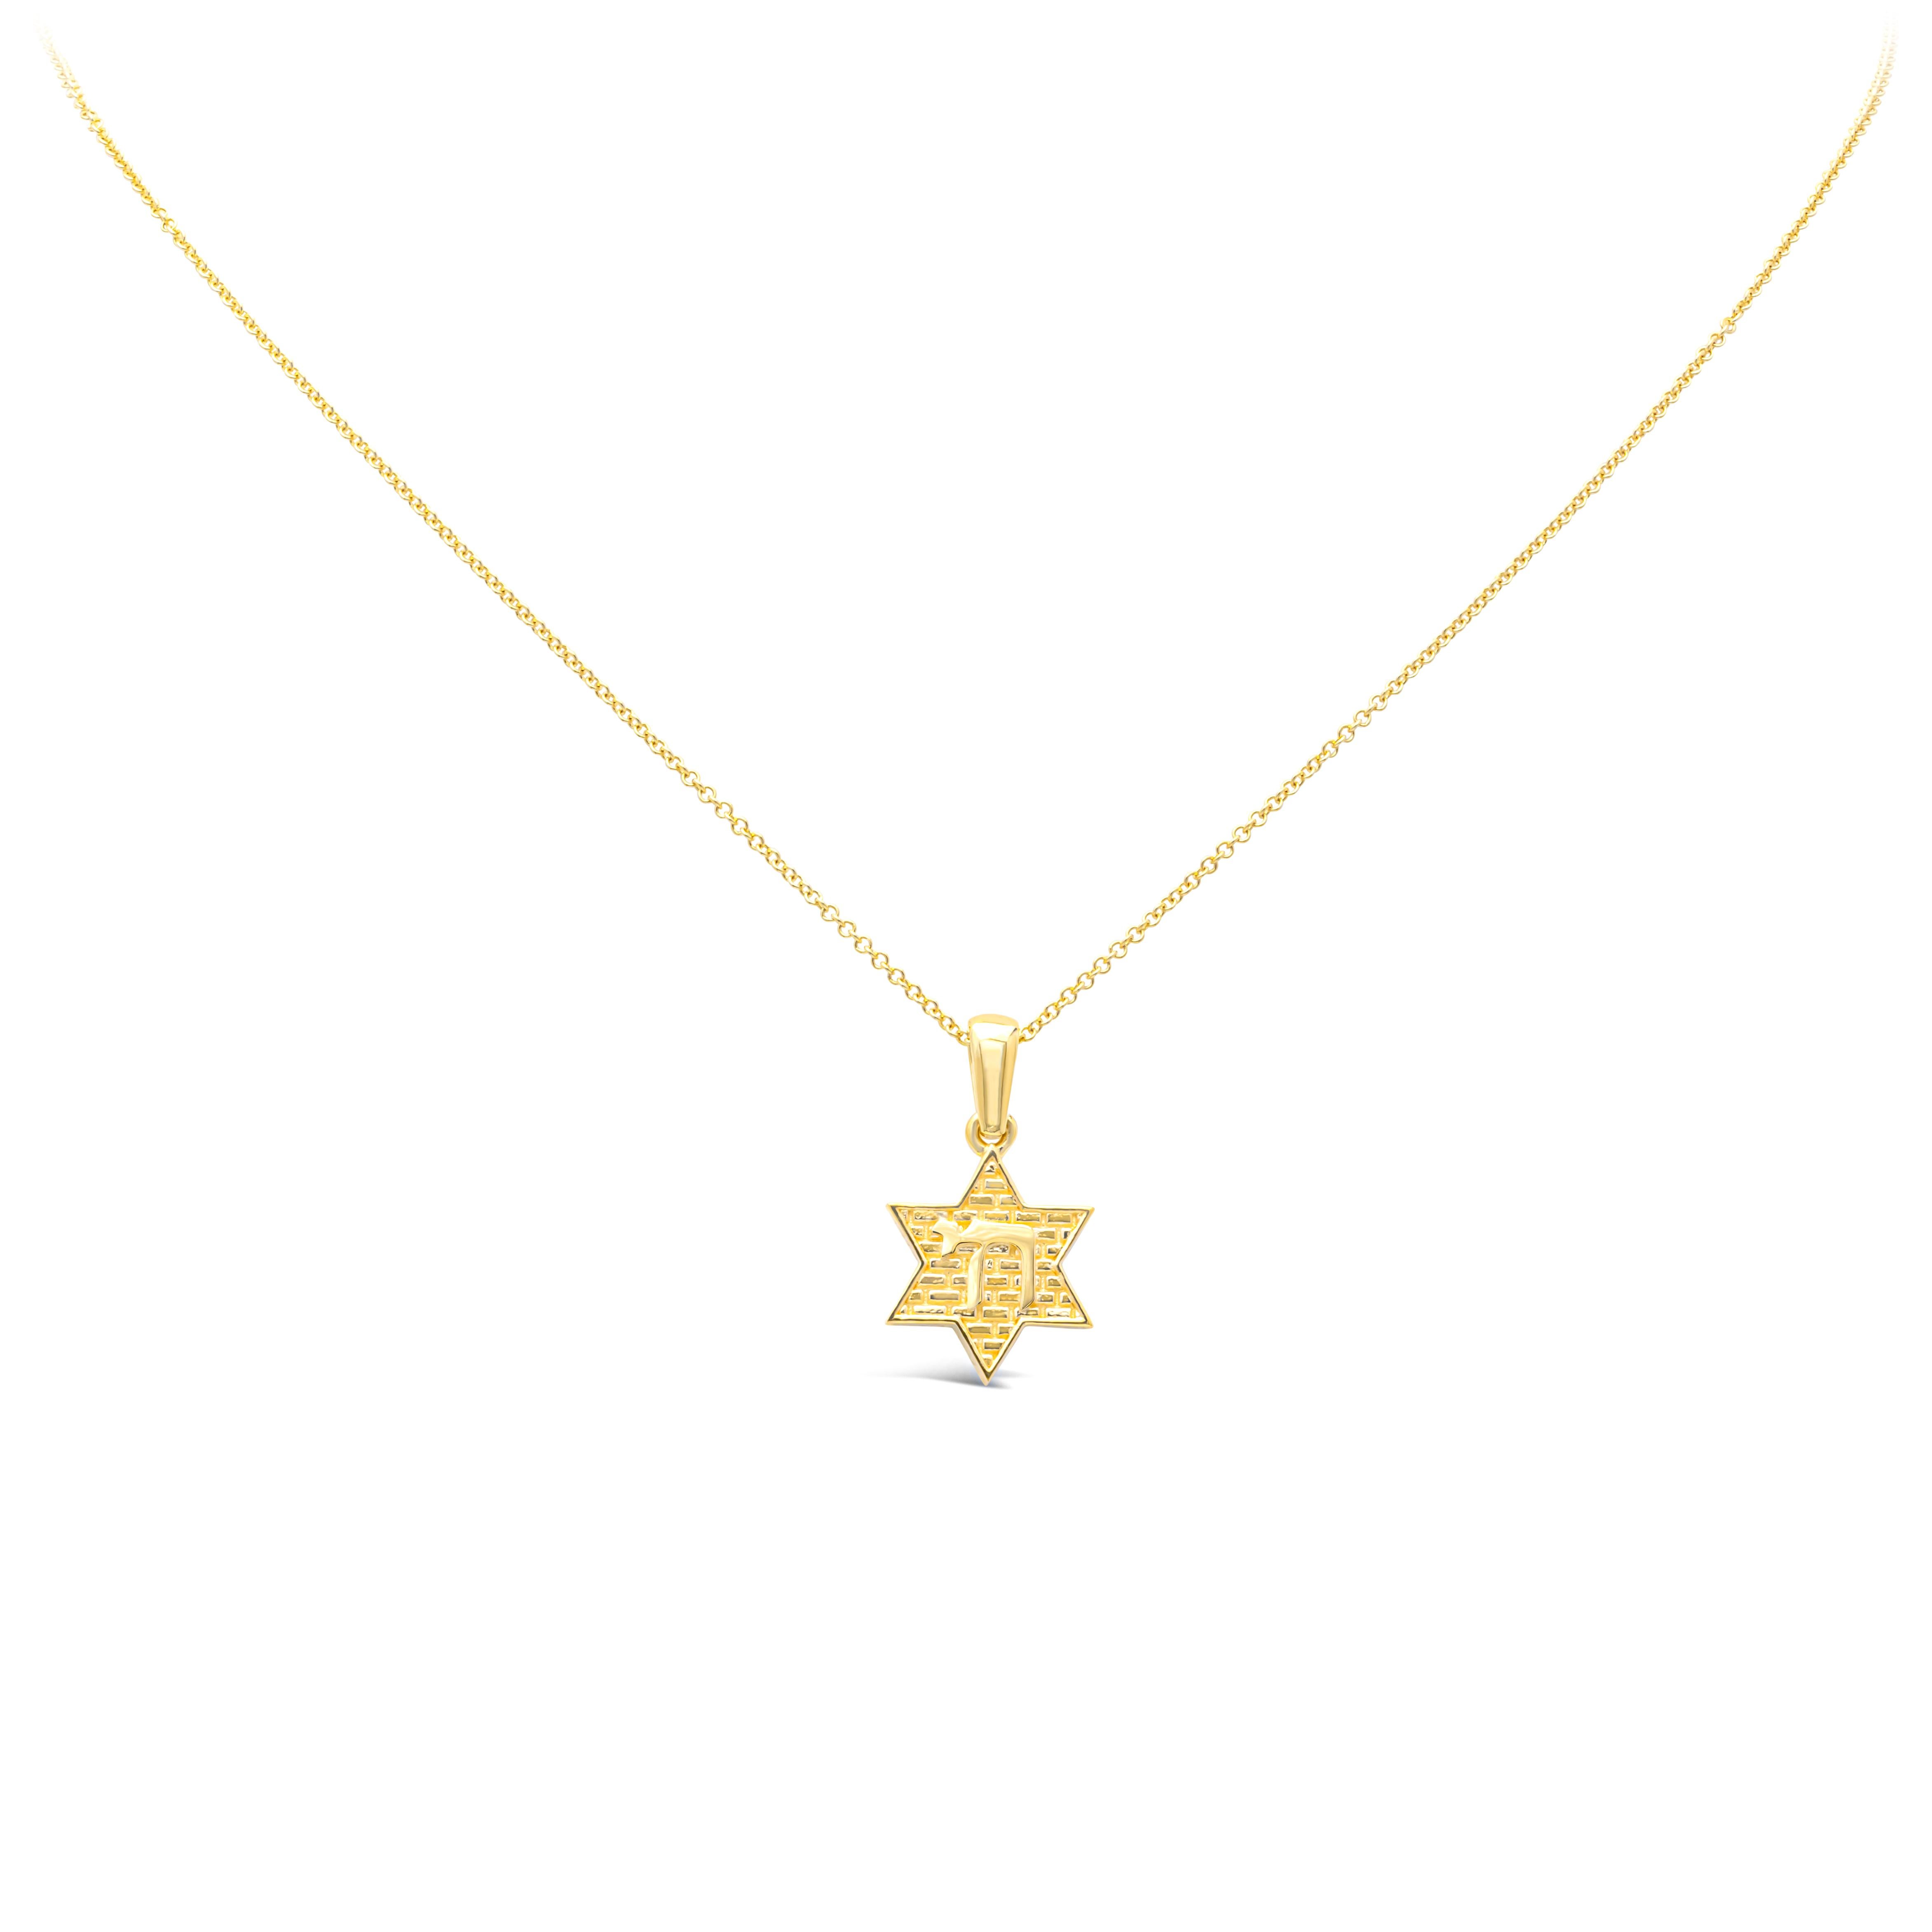 Showcasing an 18k yellow gold traditional religious star of David pendant necklace accented with 